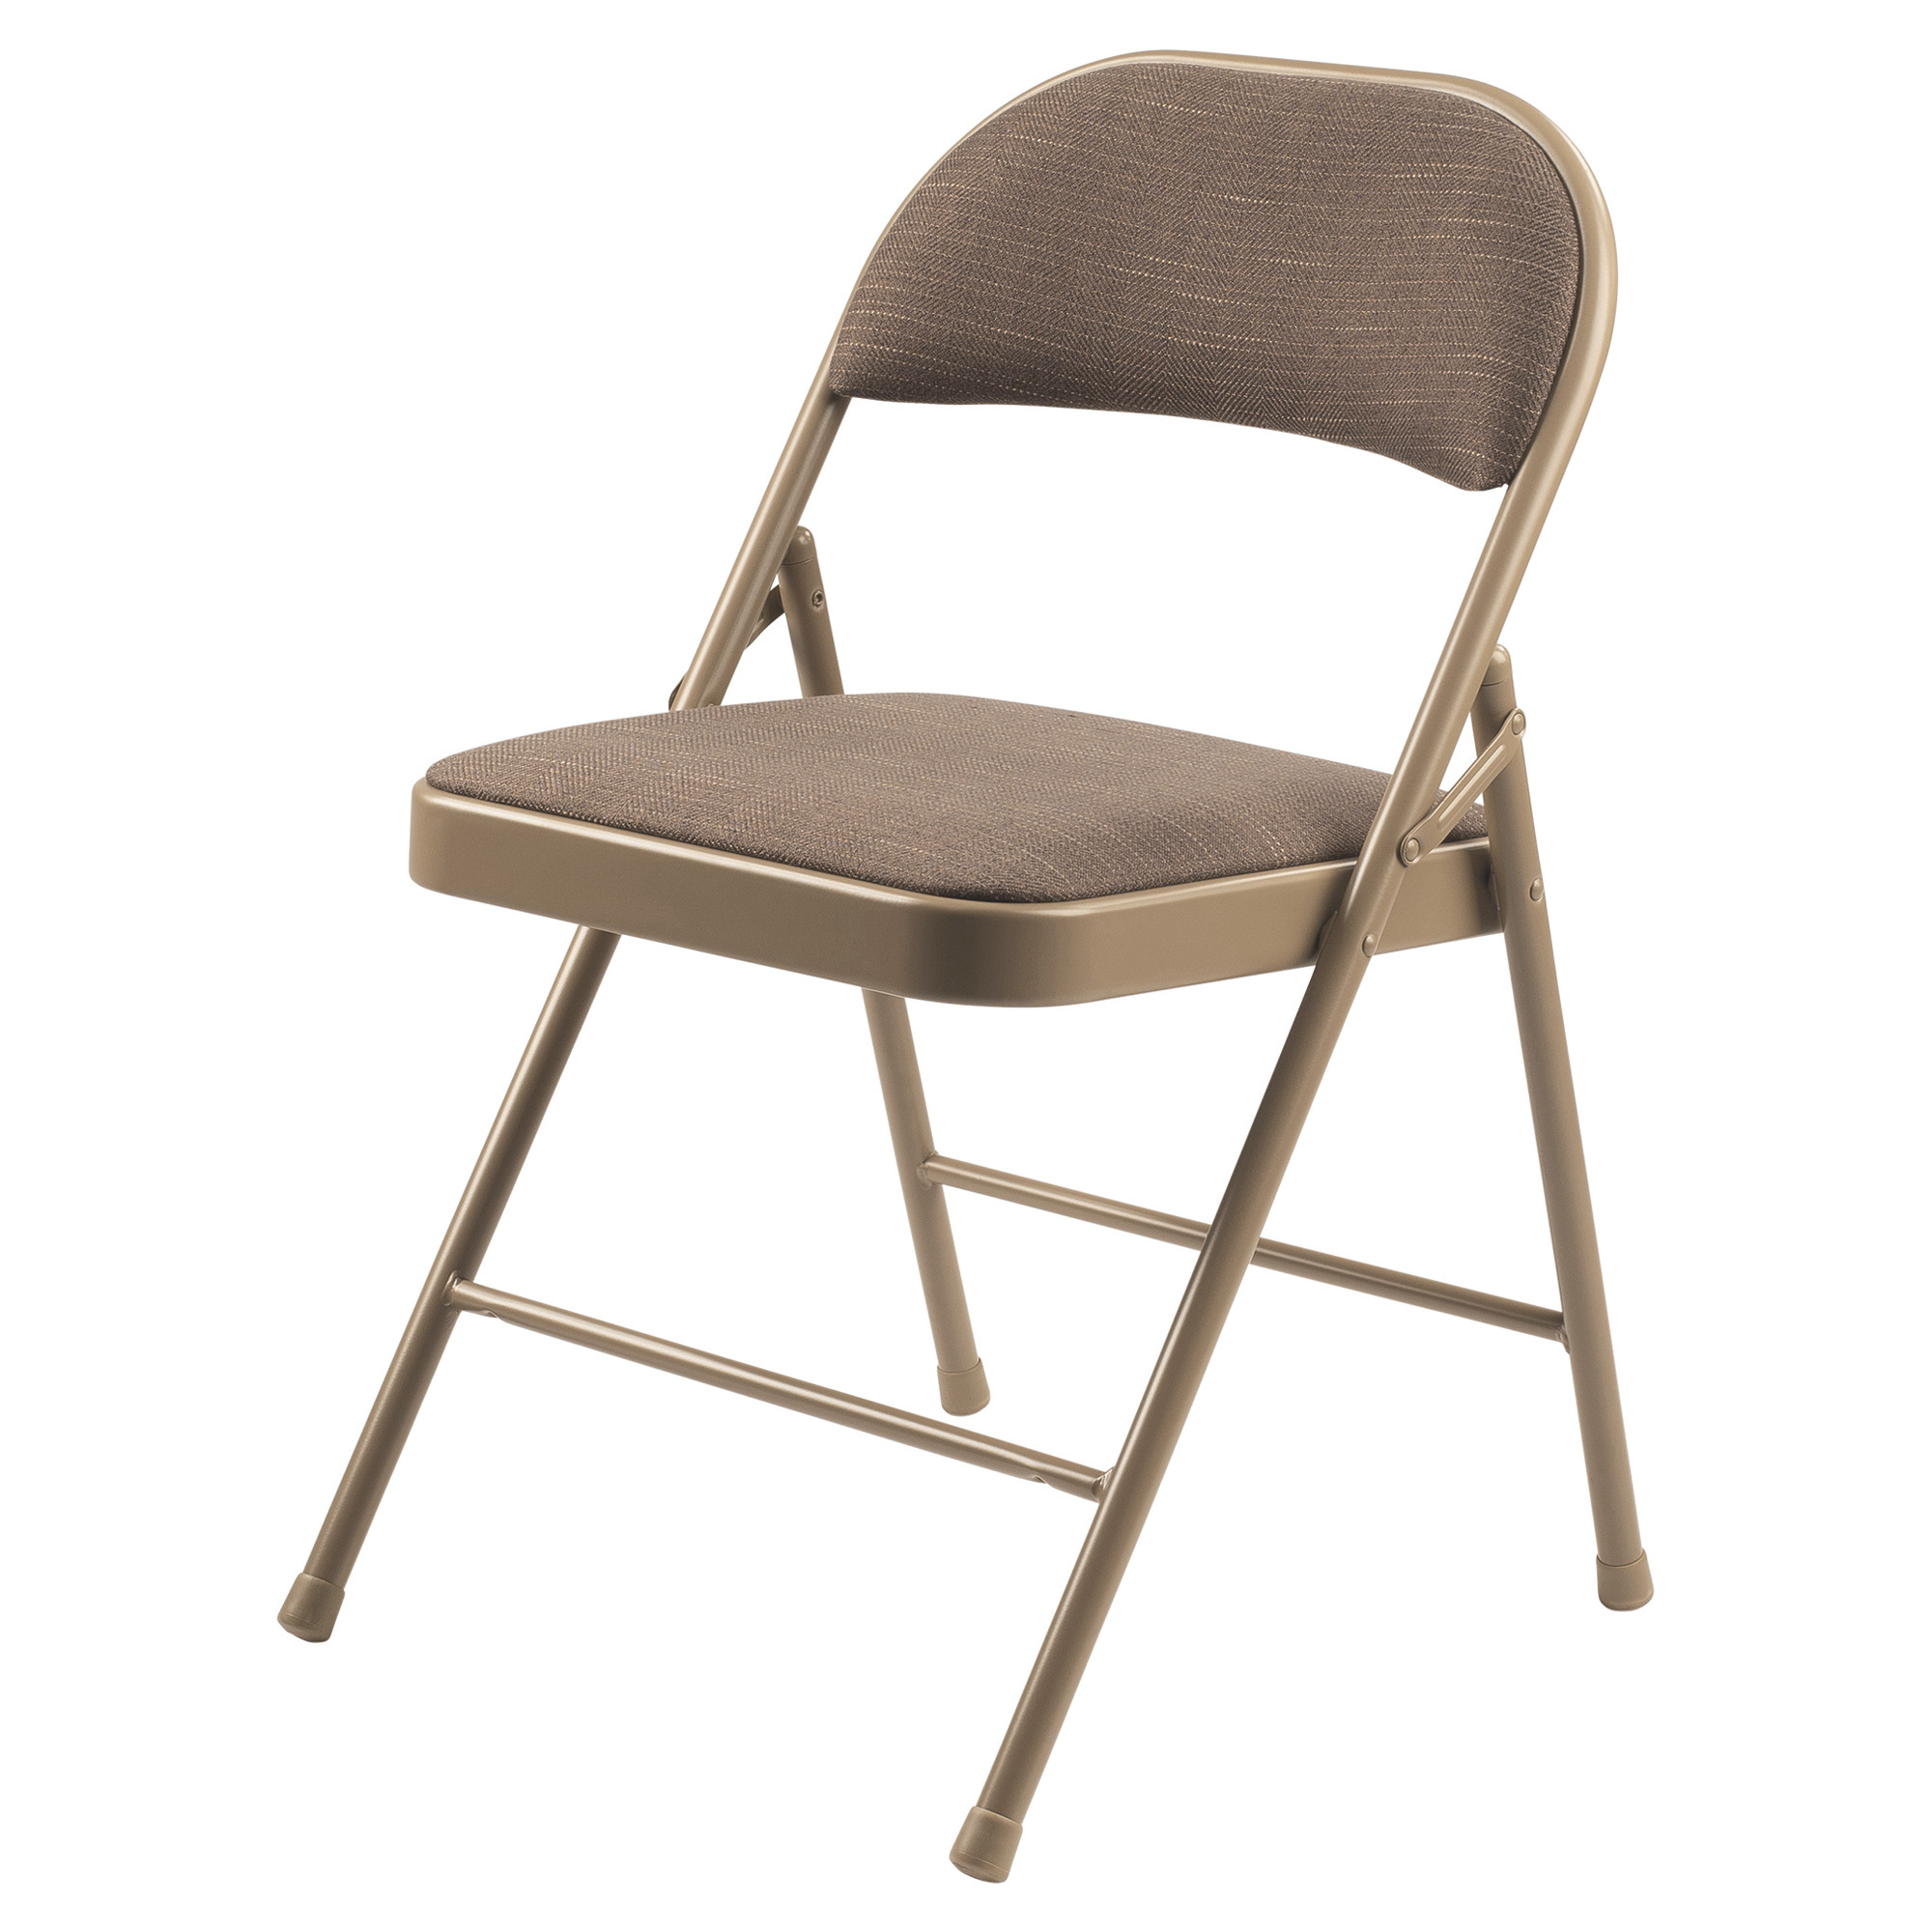 National Public Seating Fabric Padded Folding Chairs â 4-Pack, Brown, Model 973